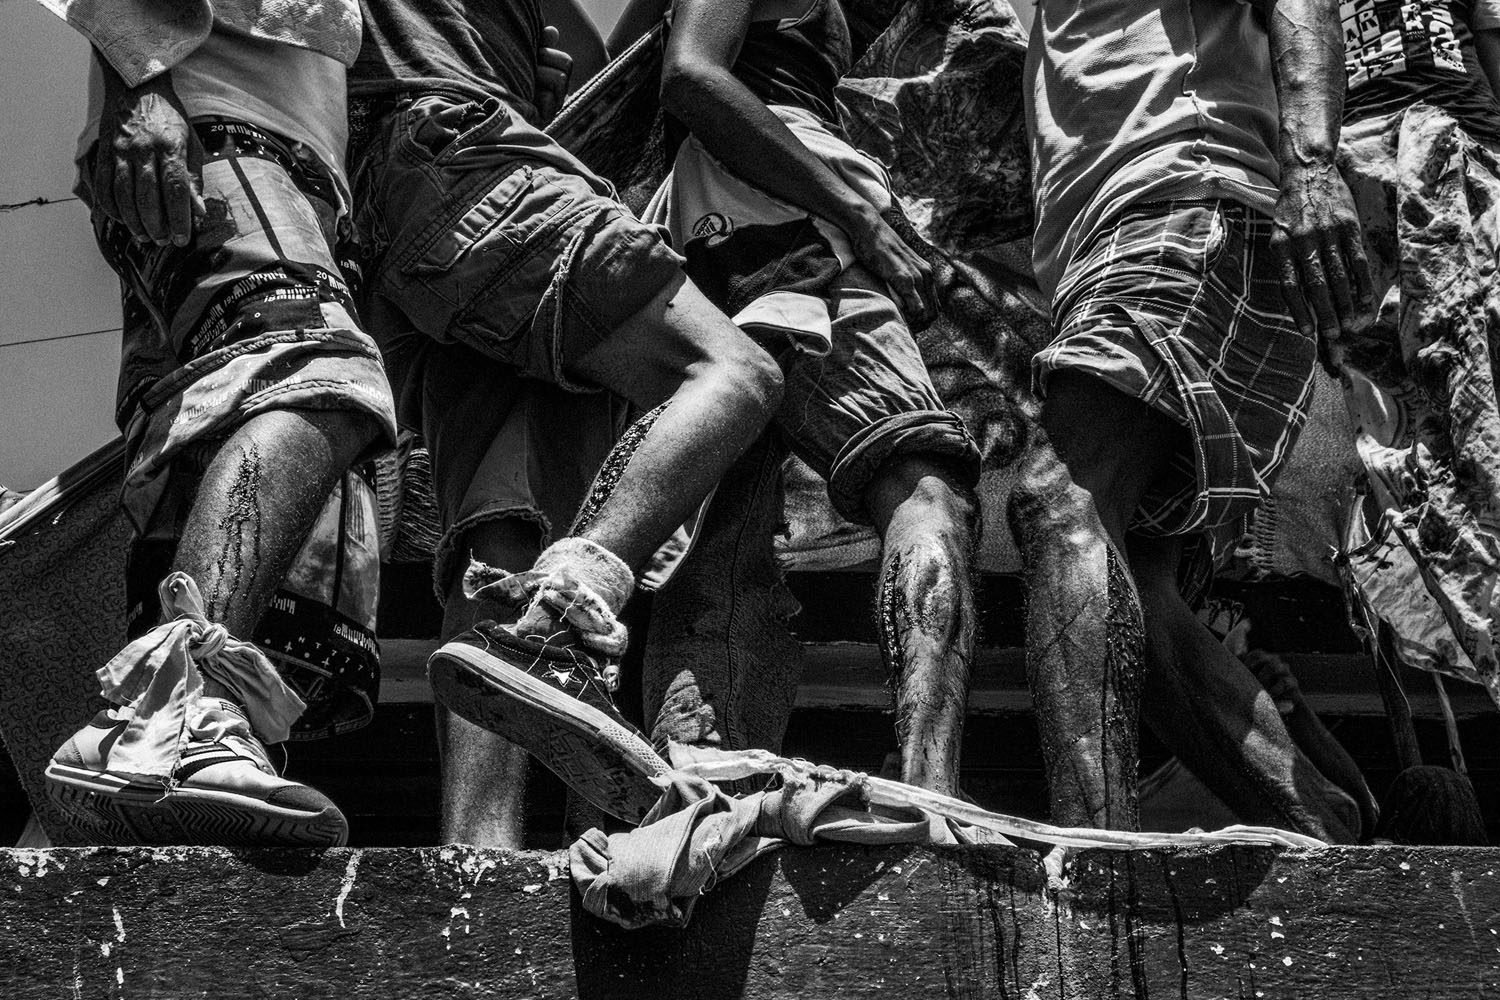 CIUDAD BOLIVAR, VENEZUELA - APRIL 2013: Prisoners making a blood strike on the roof tops of the prison requesting their transport to the capital of the country, Caracas. (Photo by Sebastián Liste/ Reportage by Getty Images)